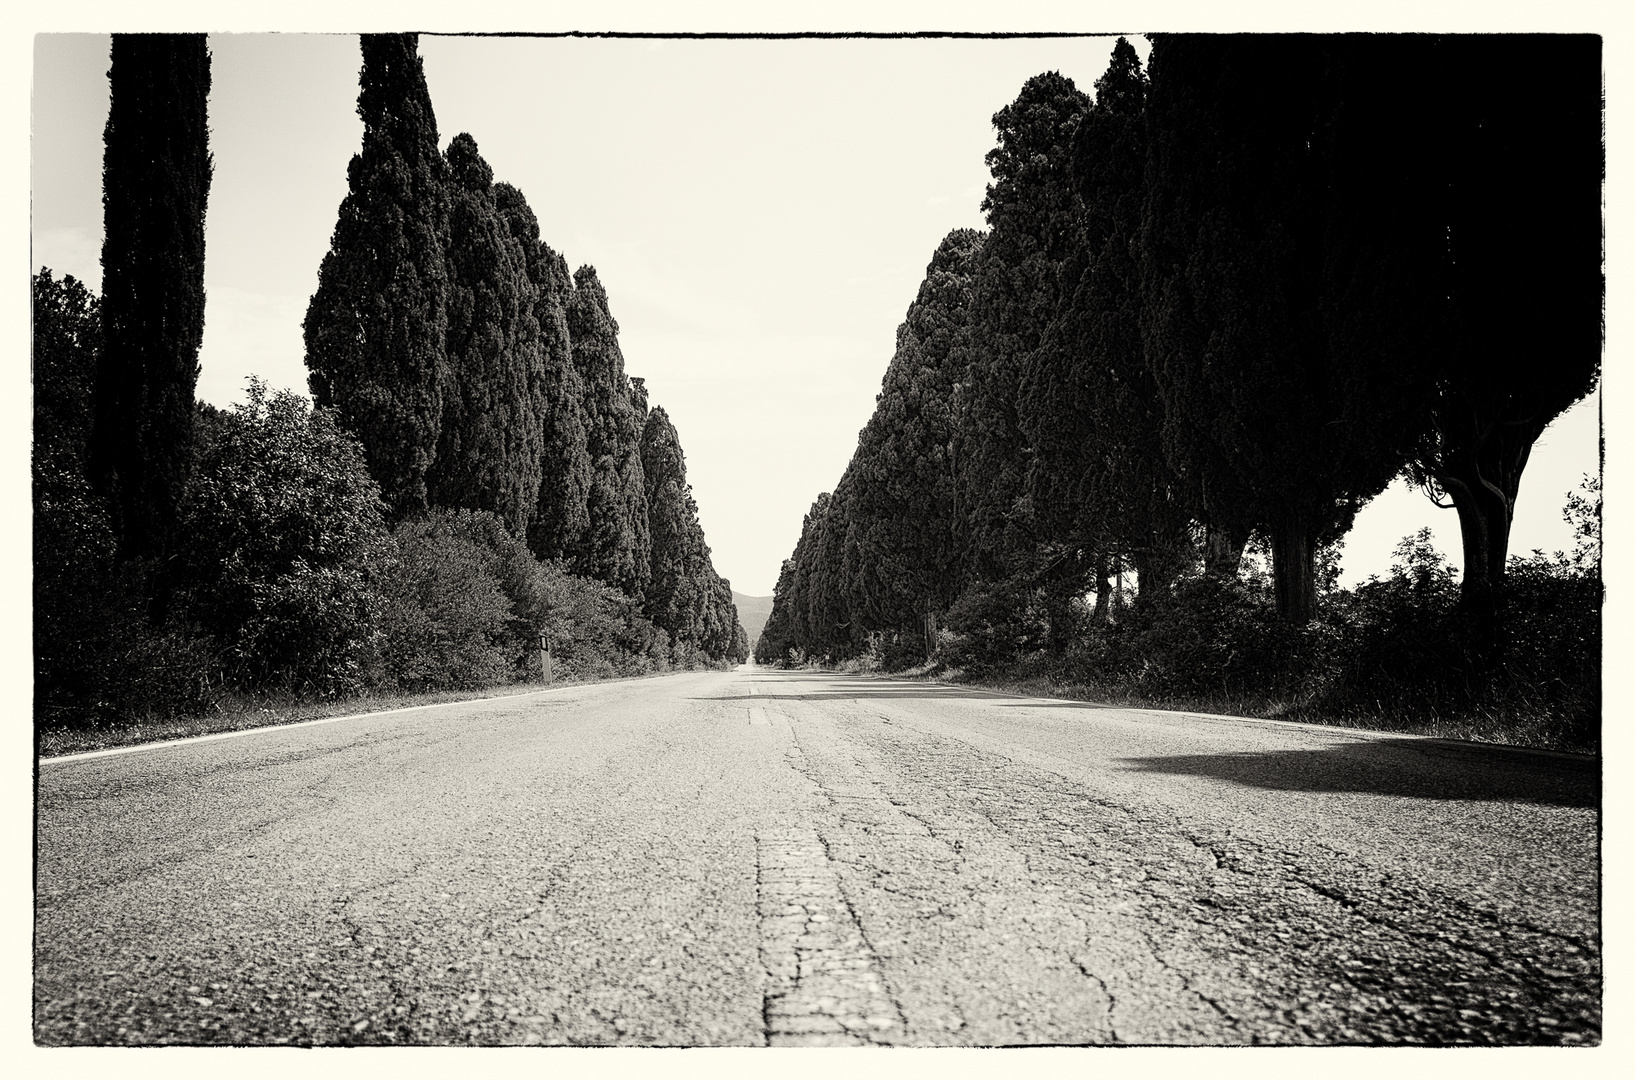 The way to bolgheri